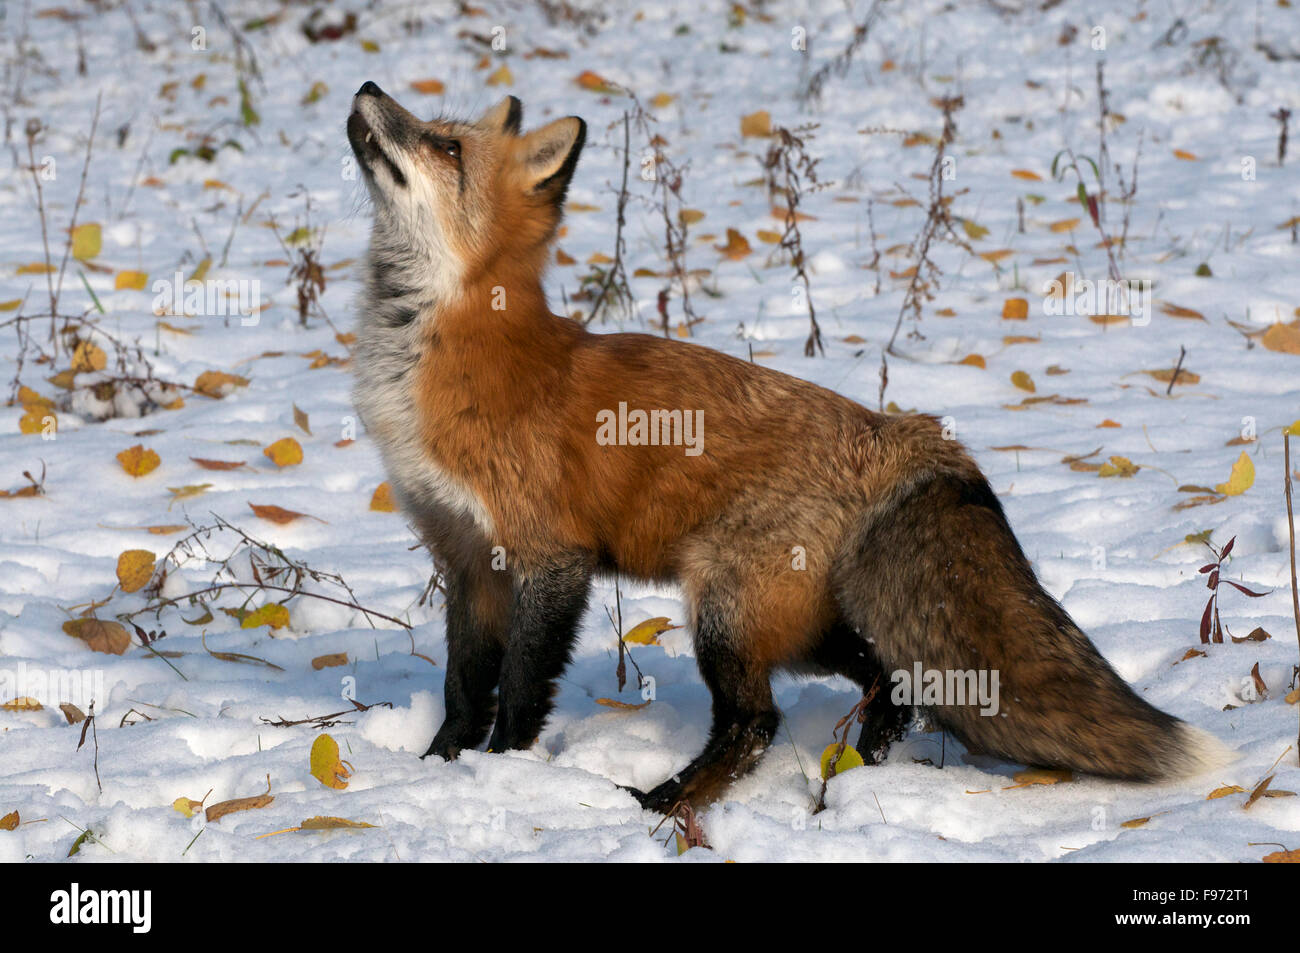 Red Fox standing in winter forest with colorful leaves fallen on